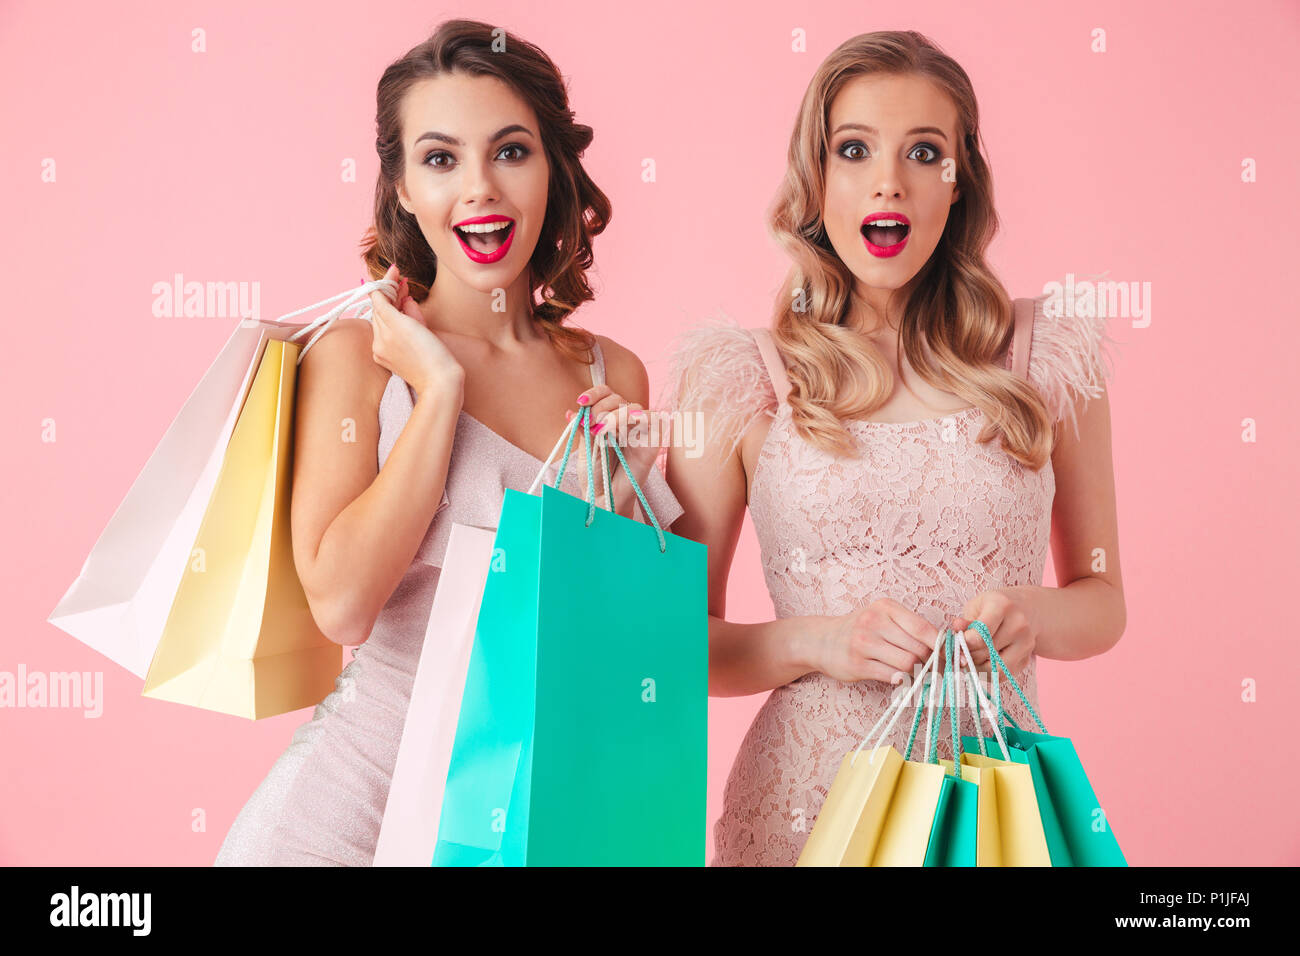 Two Happy elegant women in dresses holding packages and looking at the camera over pink background Stock Photo